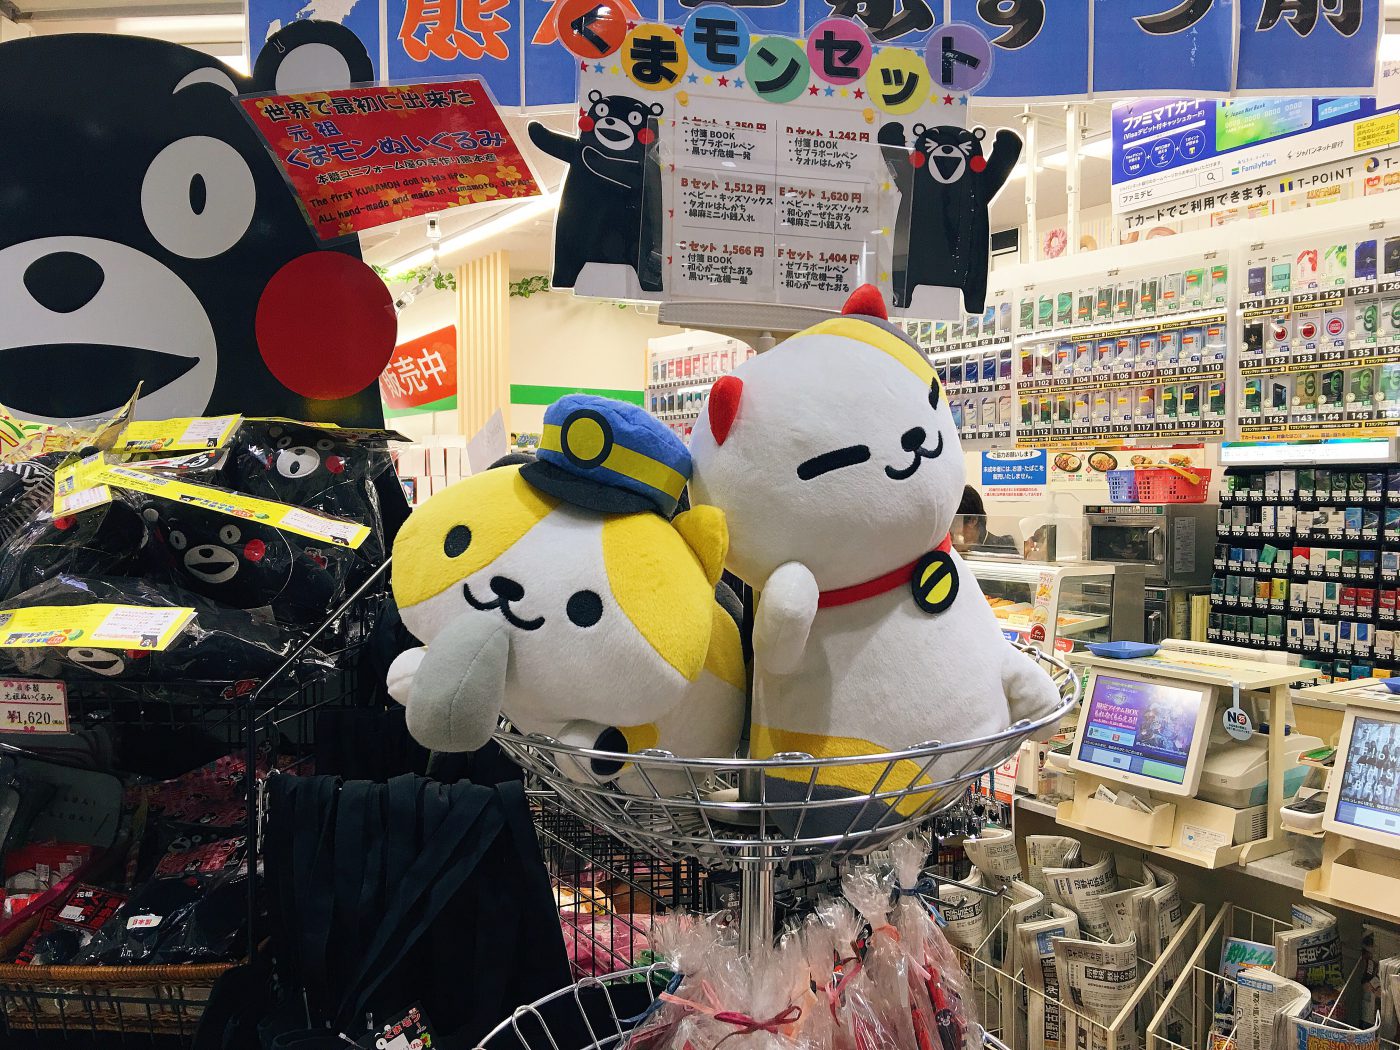 Neko Atsume plushies at the Kumamoto station souvenir store! Unfortunately these are not for sale :(